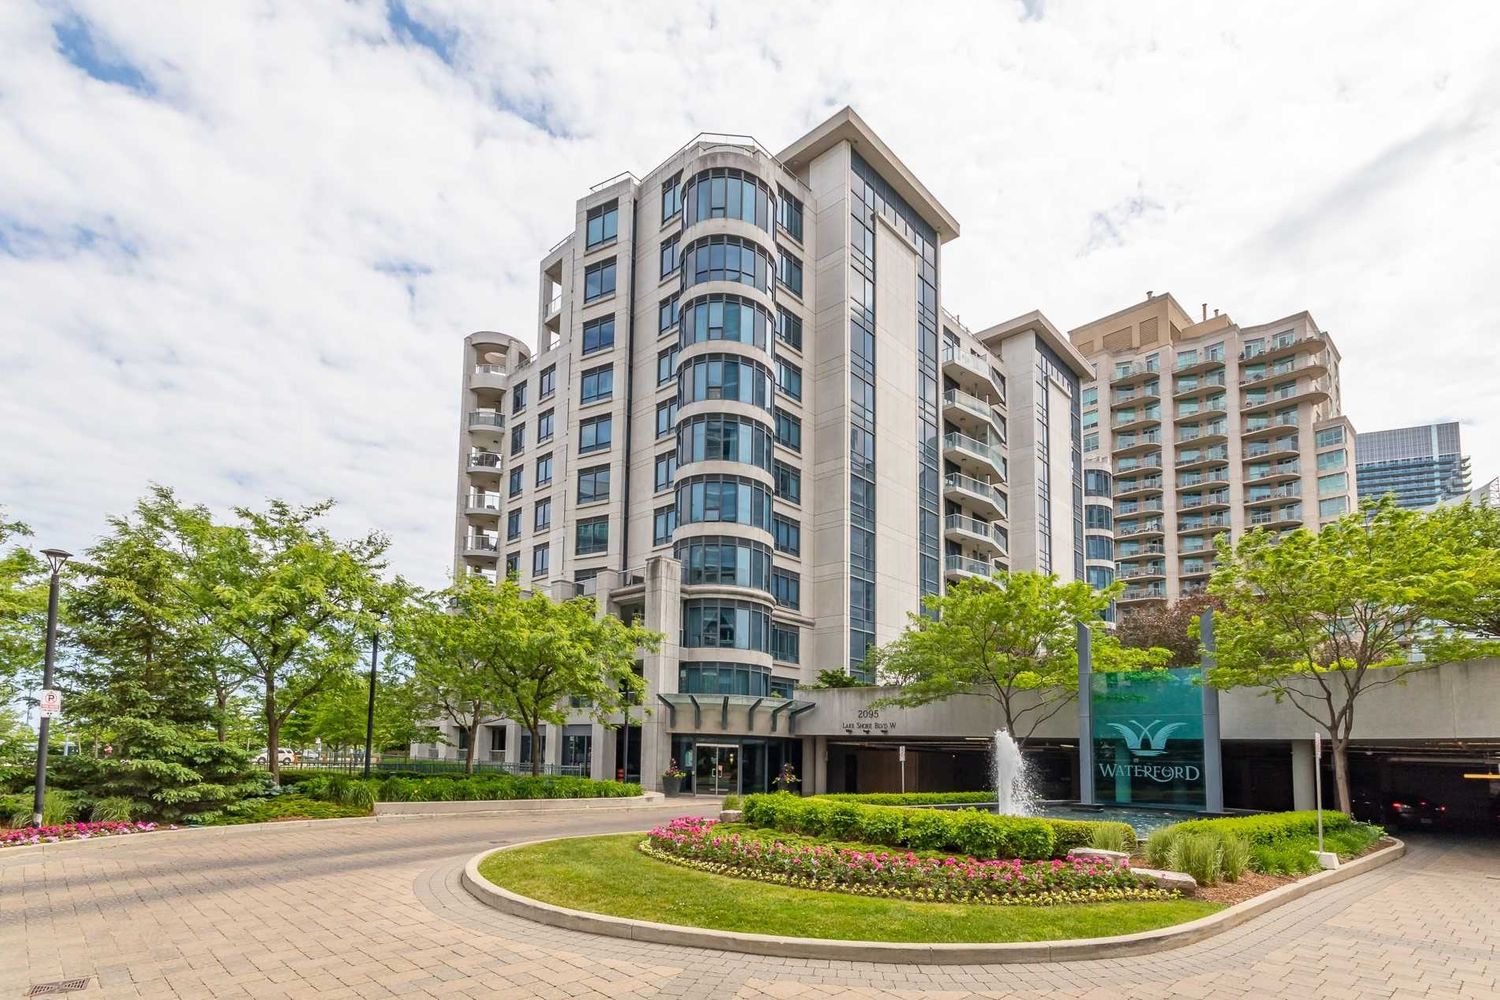 2083-2095 Lake Shore Boulevard W. Waterford Towers Condos is located in  Etobicoke, Toronto - image #2 of 2